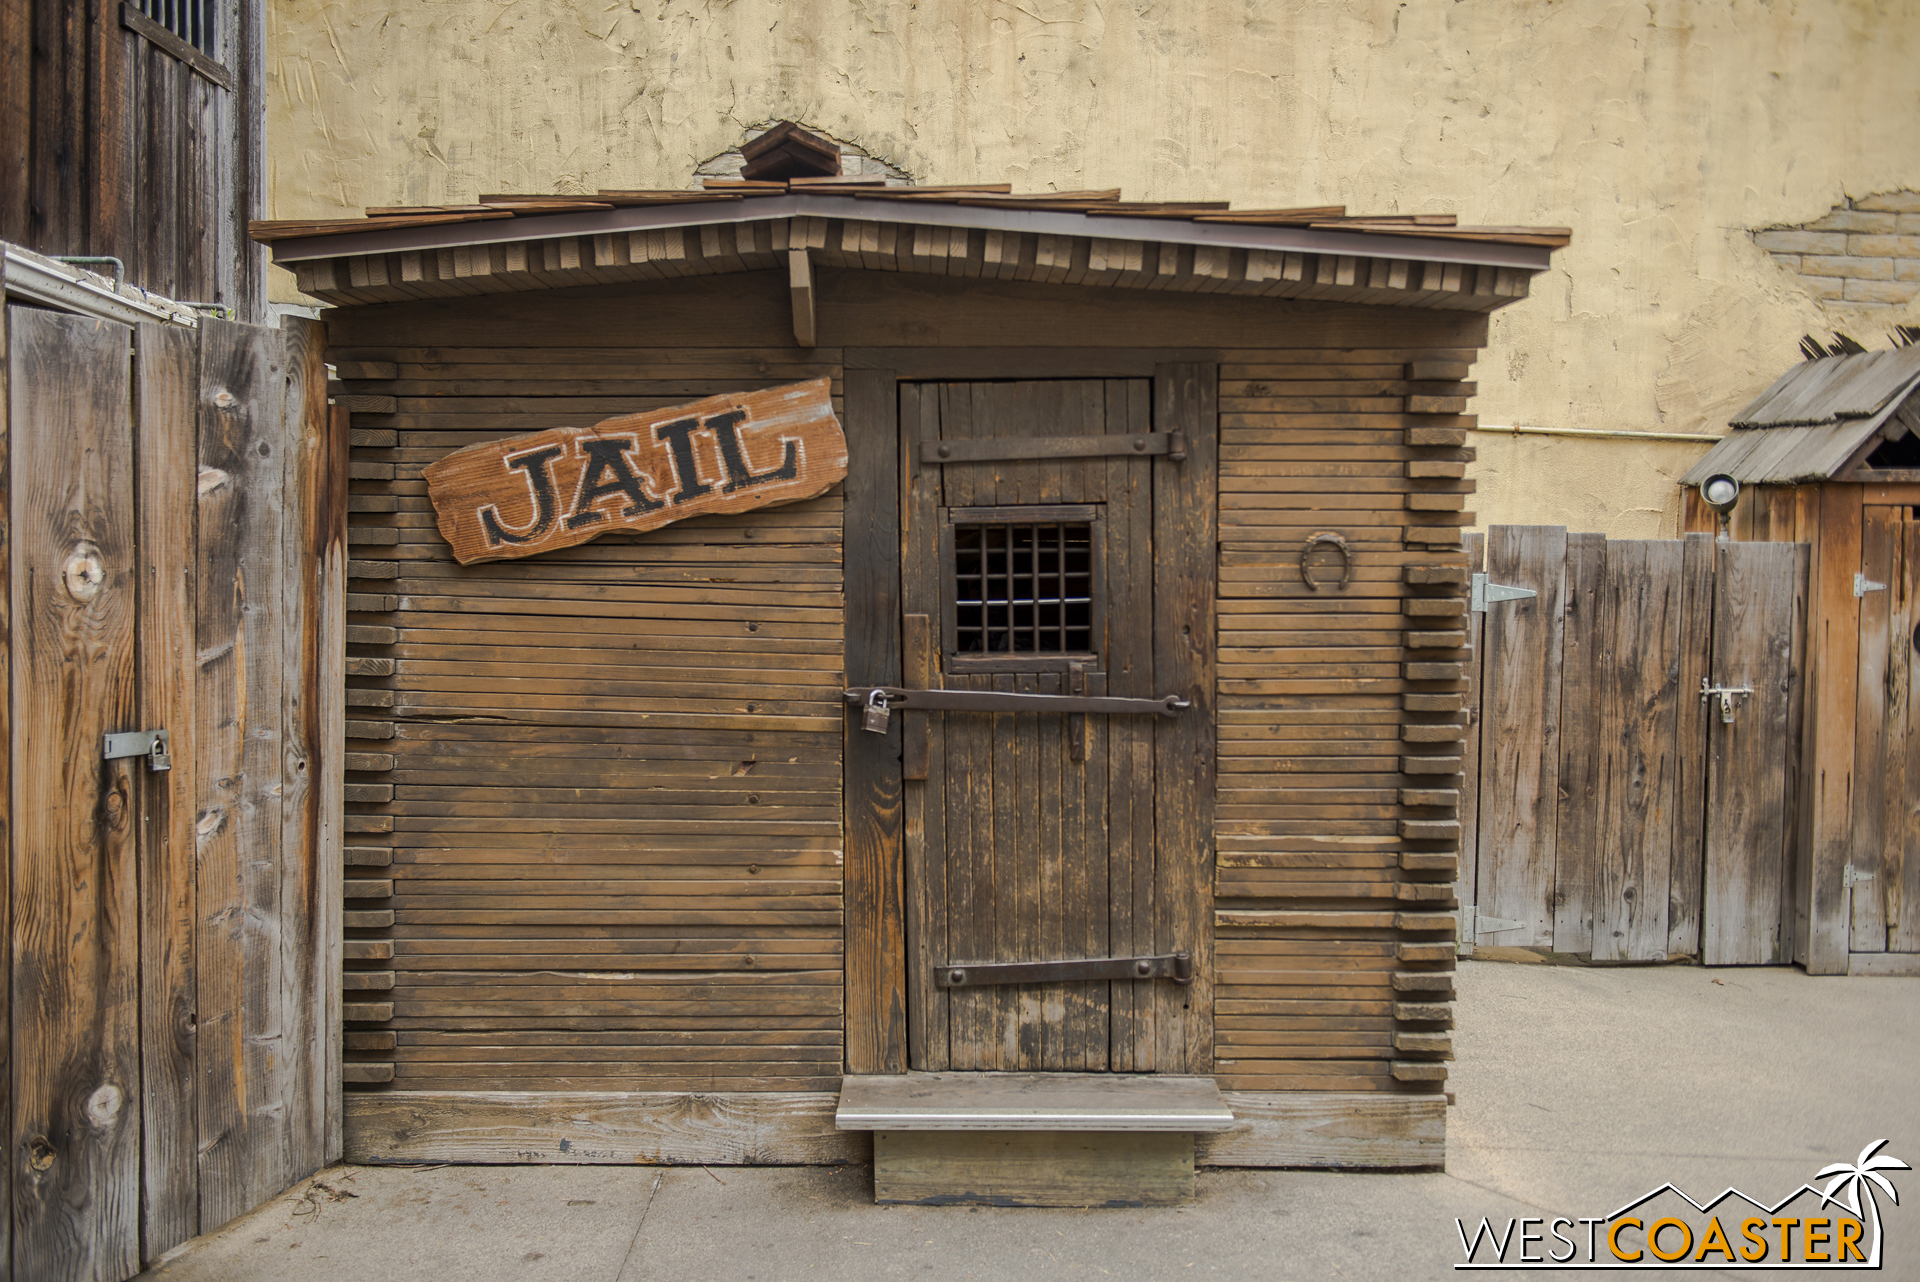  The Calico Jail is located behind Goldie's Place. 